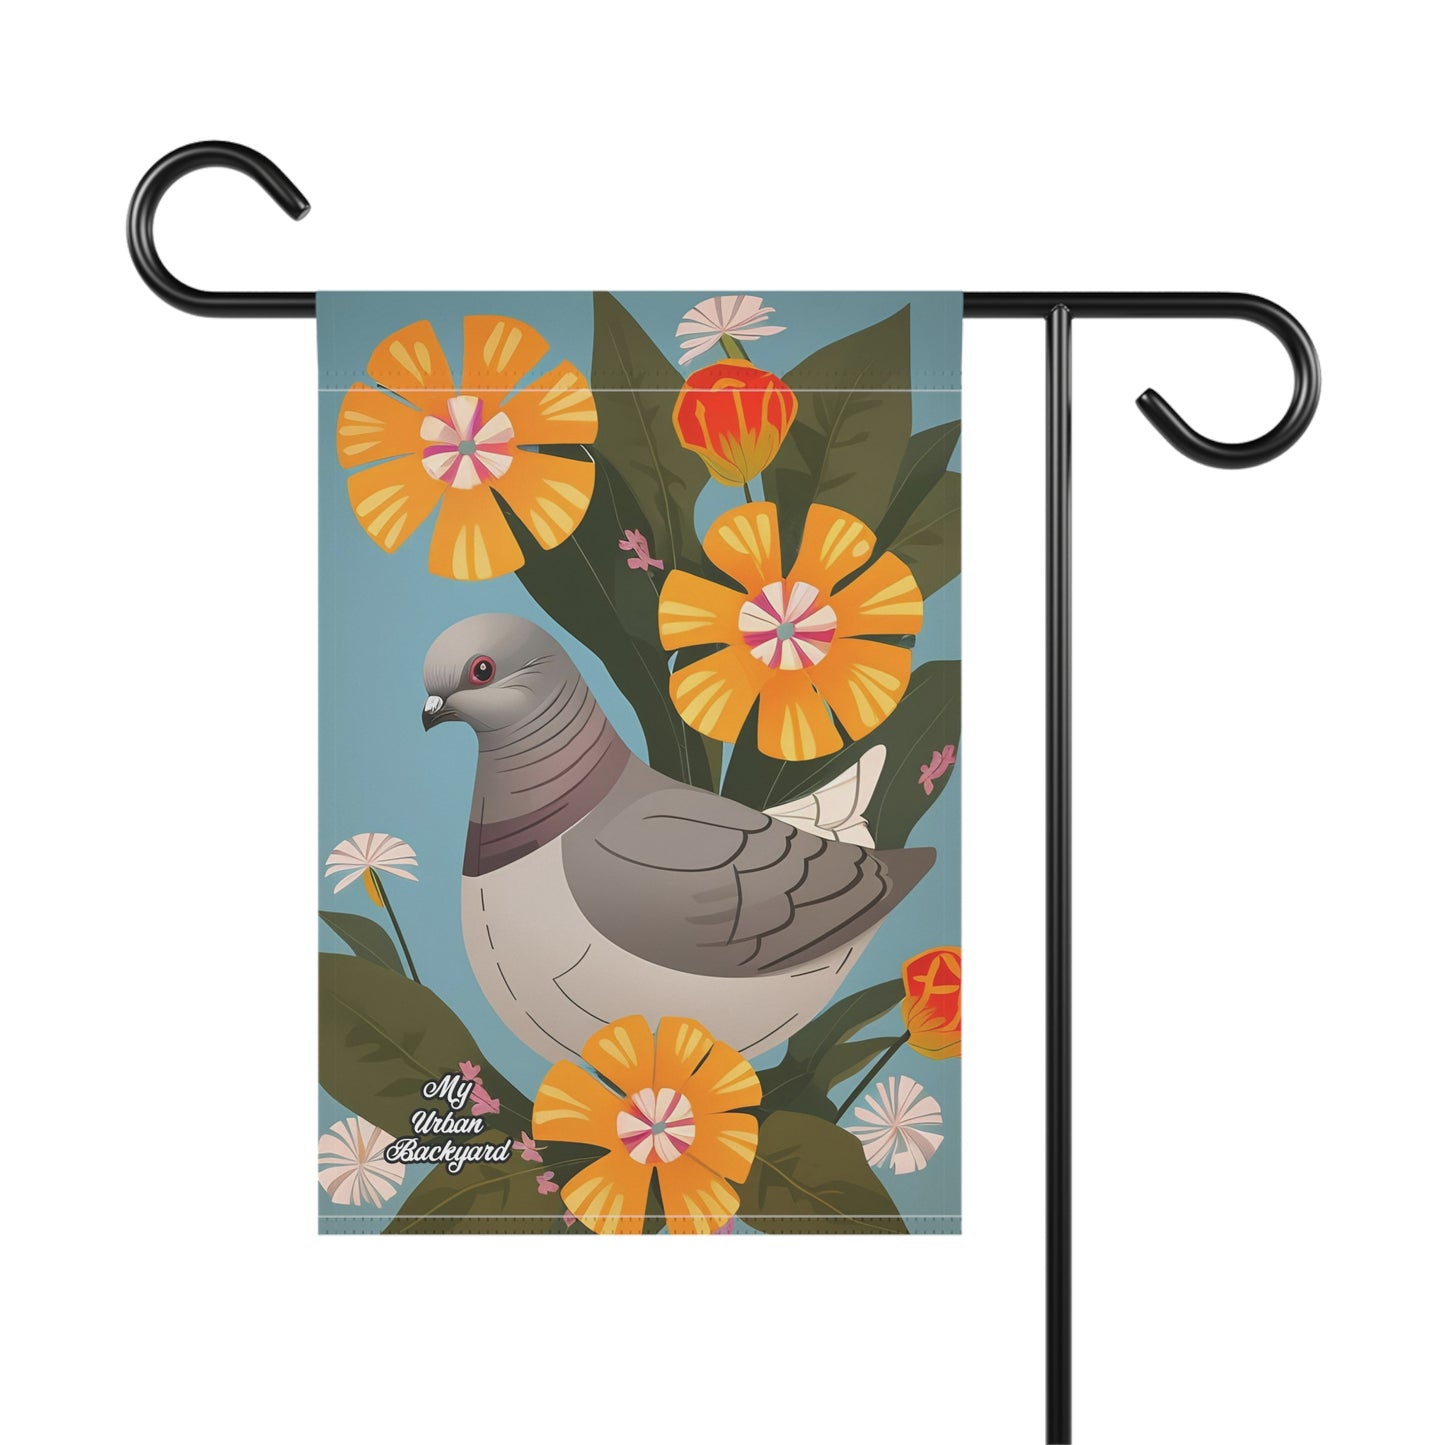 Pigeon and Flowers, Garden Flag for Yard, Patio, Porch, or Work, 12"x18" - Flag only